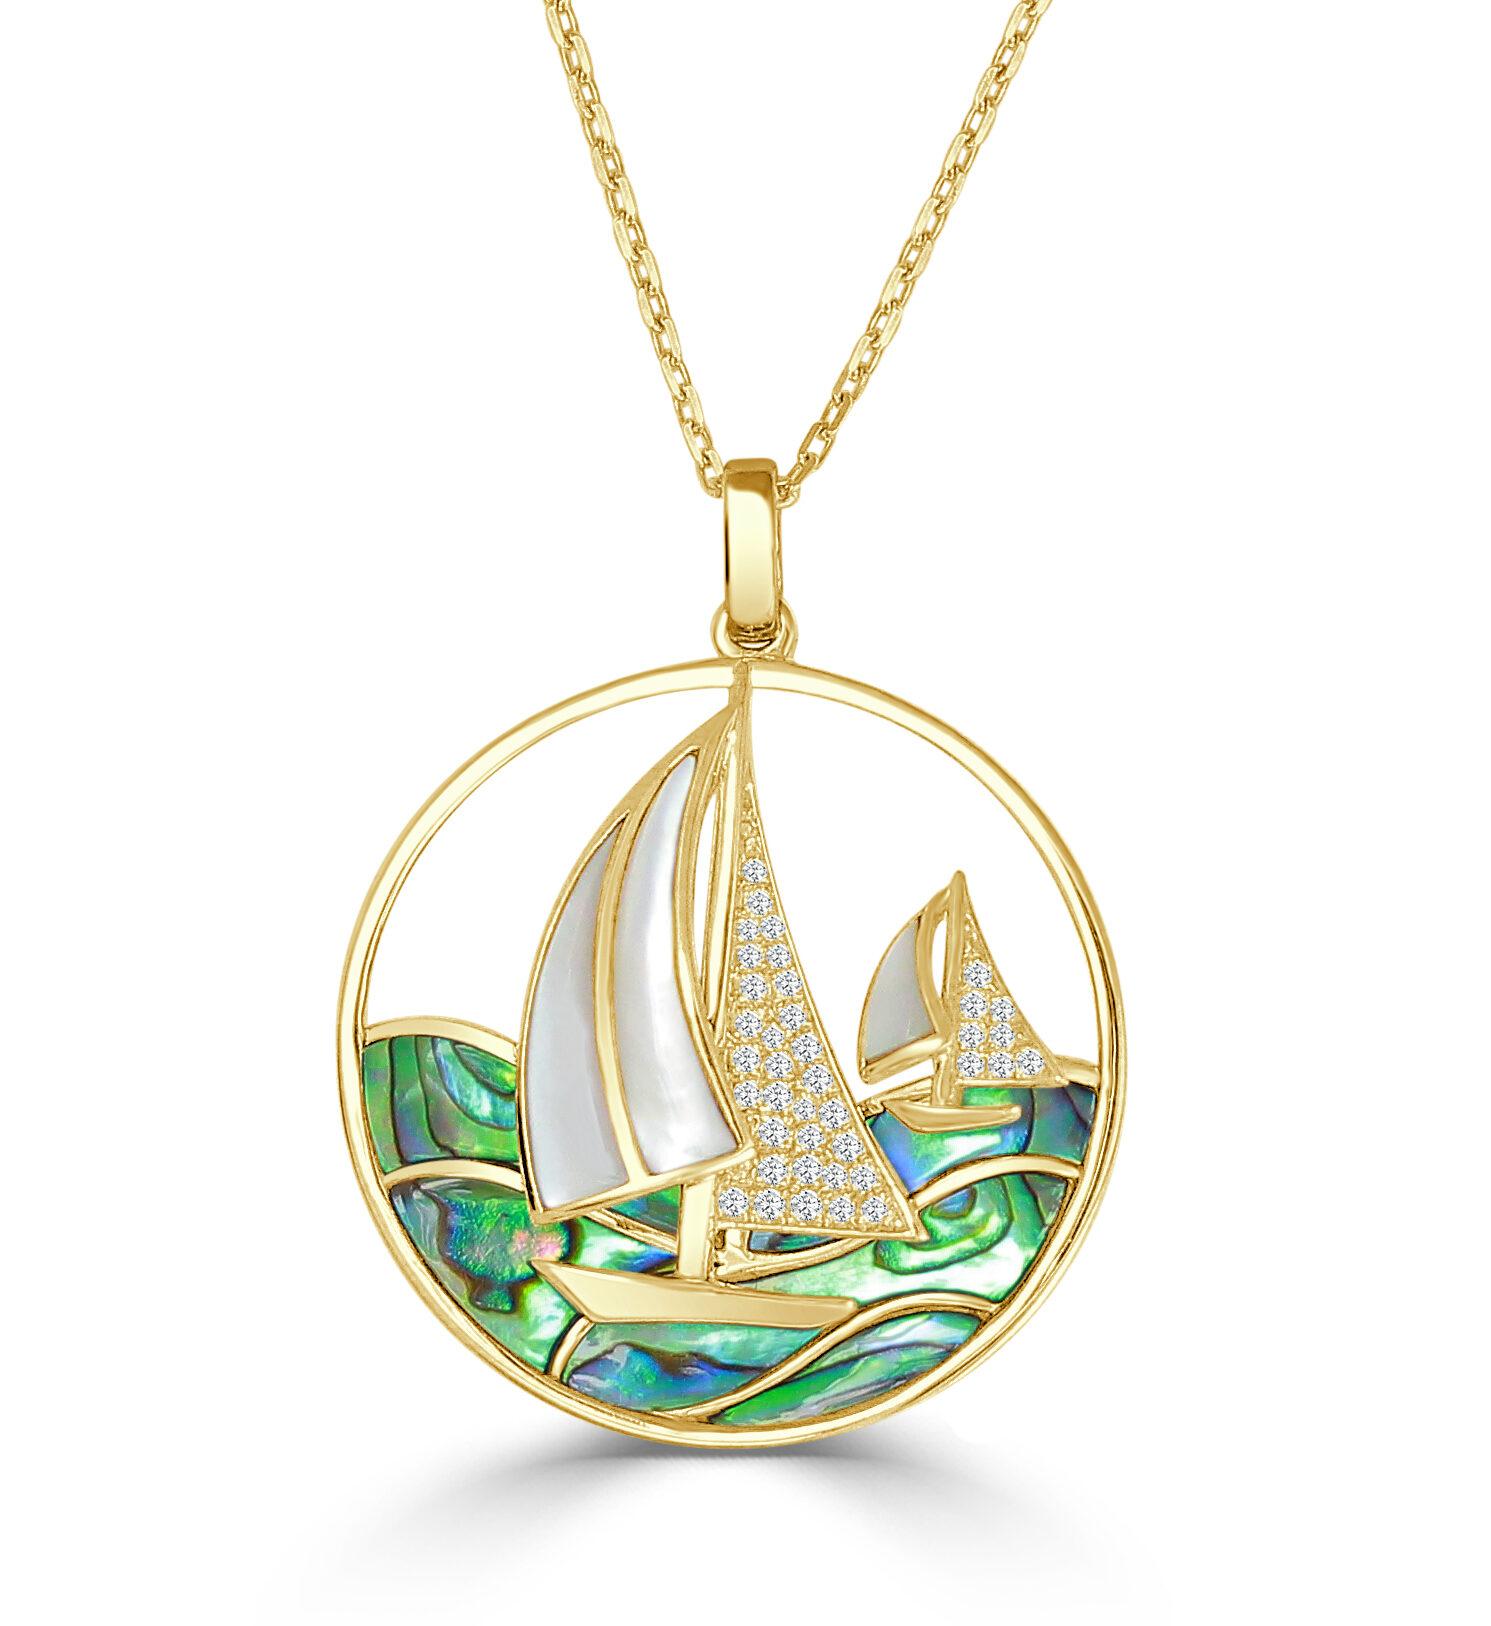 Large White Mother Of Pearl Boats With Abalone Waves Pendant With Chain, 0.23 Ct. approximately 30mm diameter / 37.5 mm including bale

Available in other metal/ gemstone options: This Natural Shell pendant can be made in white, yellow or pink gold.